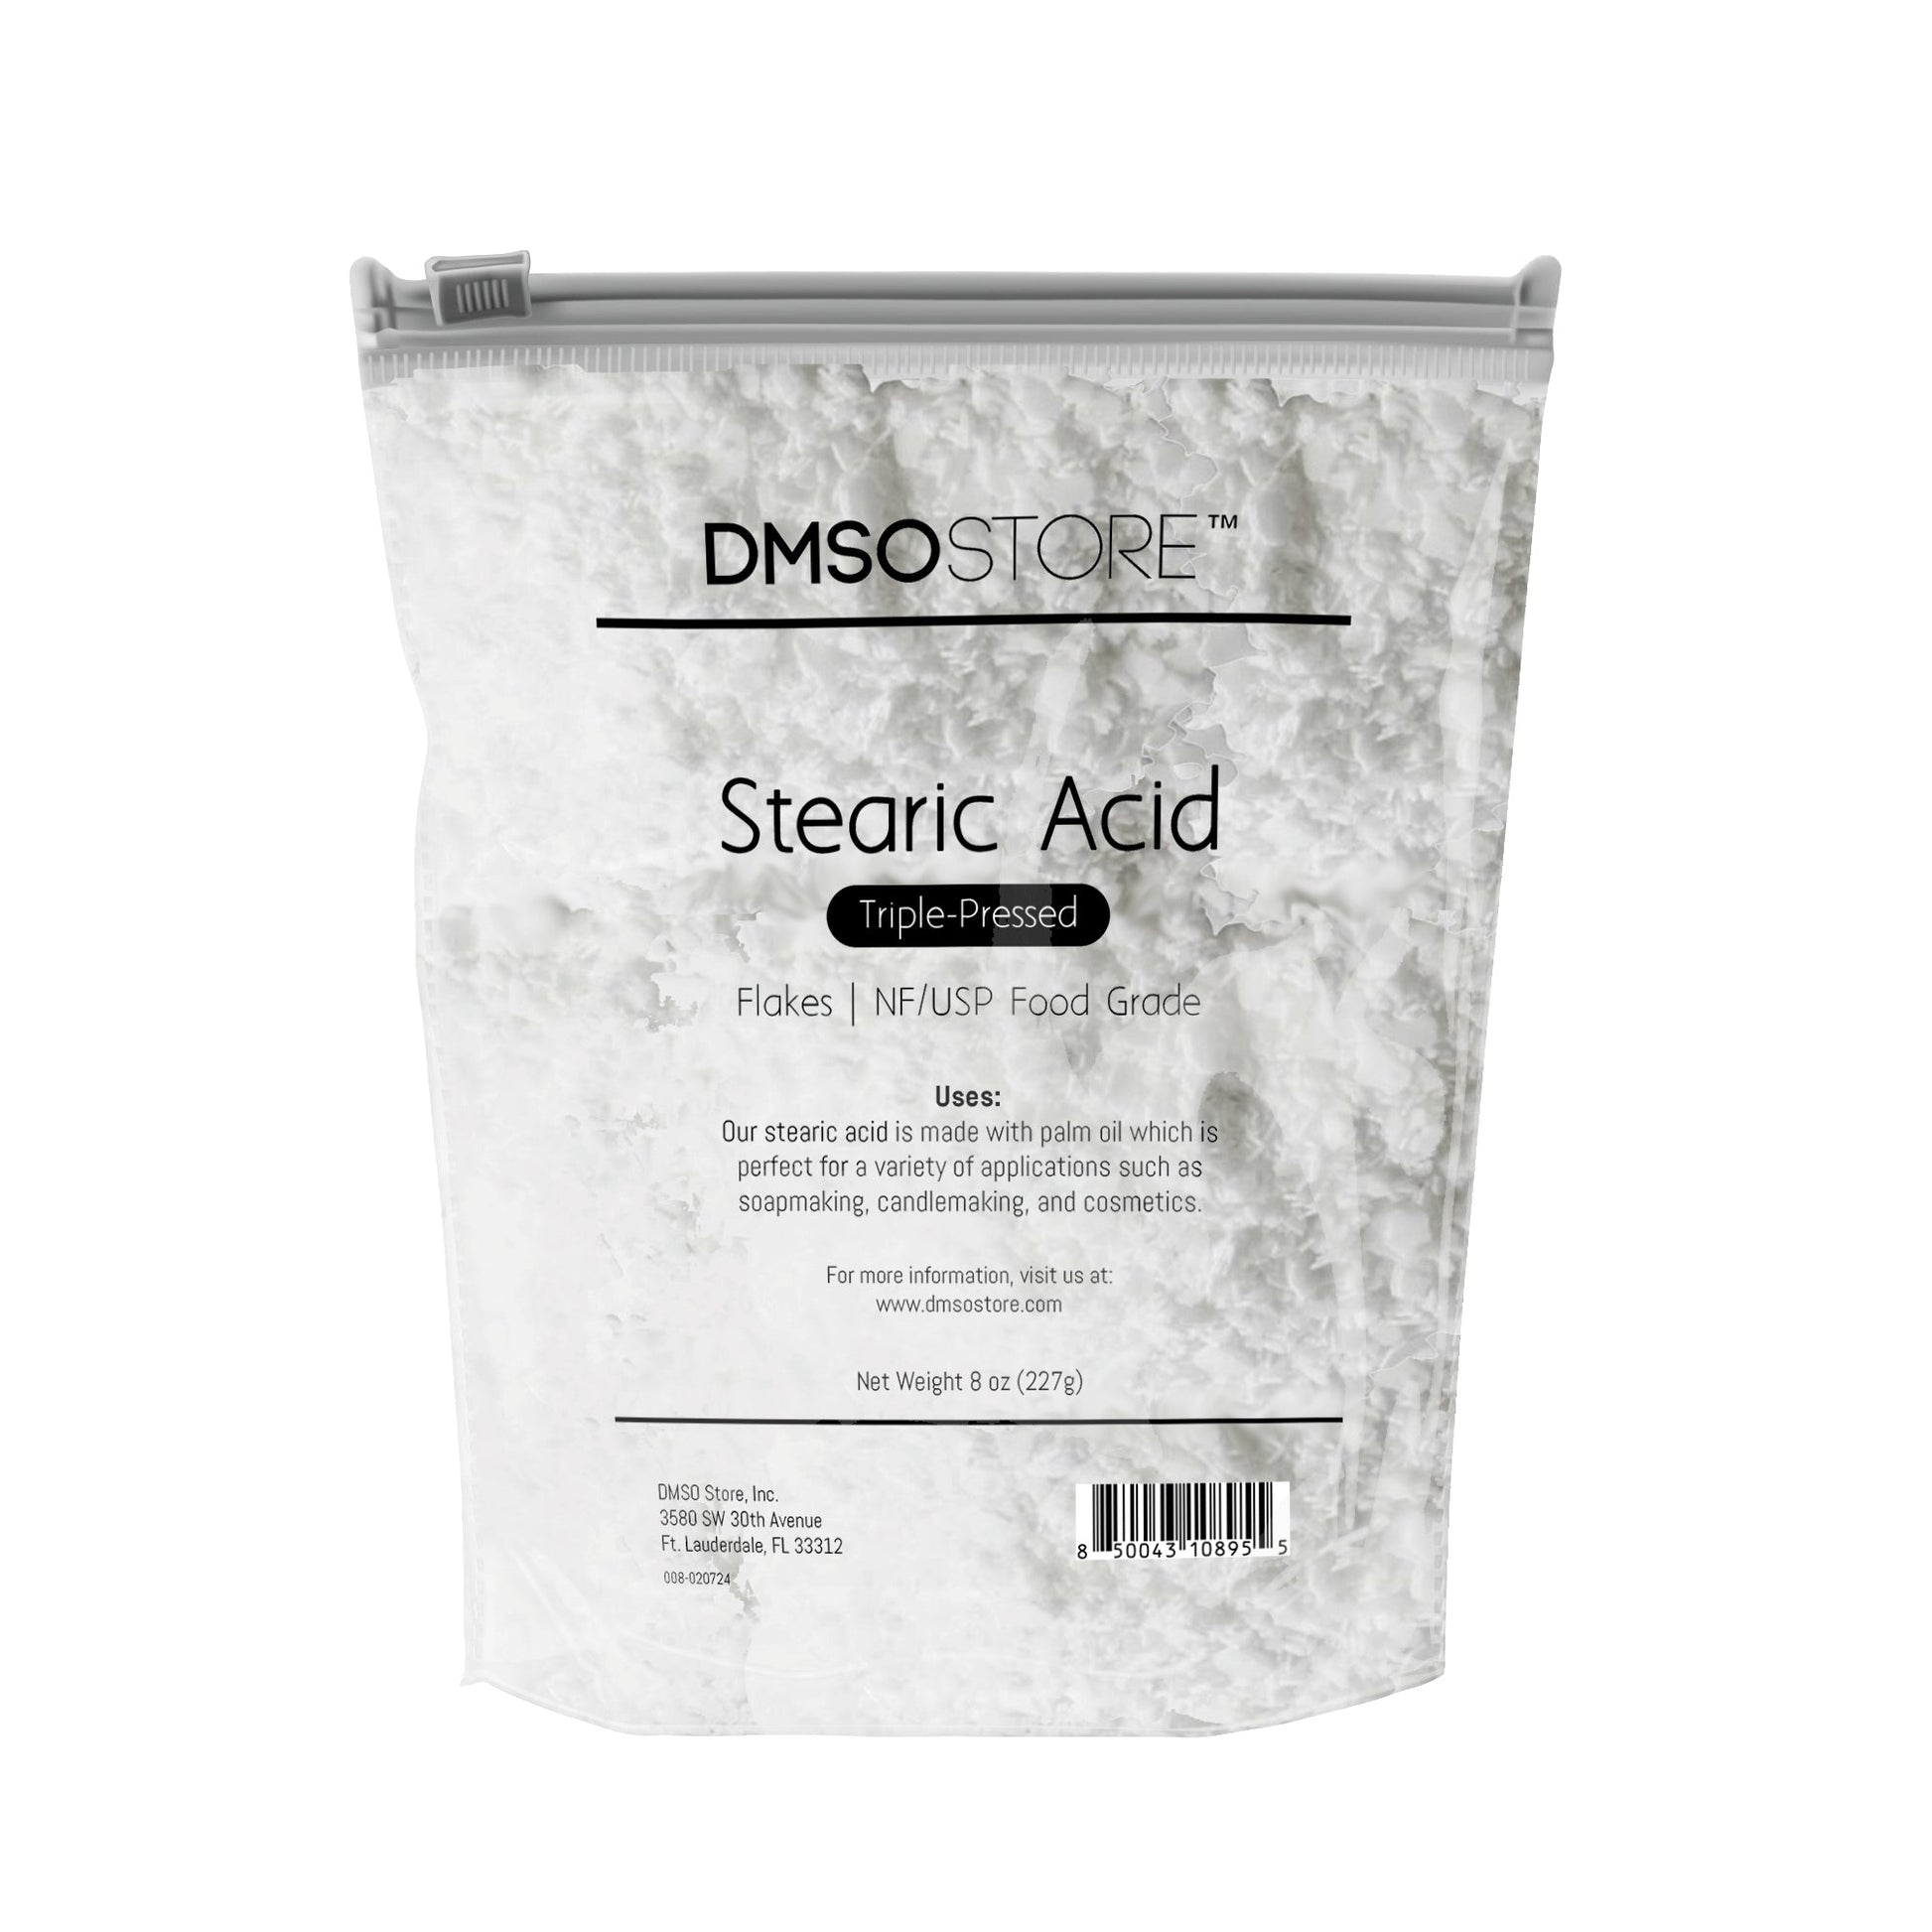 8 oz. DMSO Store brand Stearic Acid flakes, triple-pressed and NF/USP food grade, for soap making, candle making, and cosmetics. 